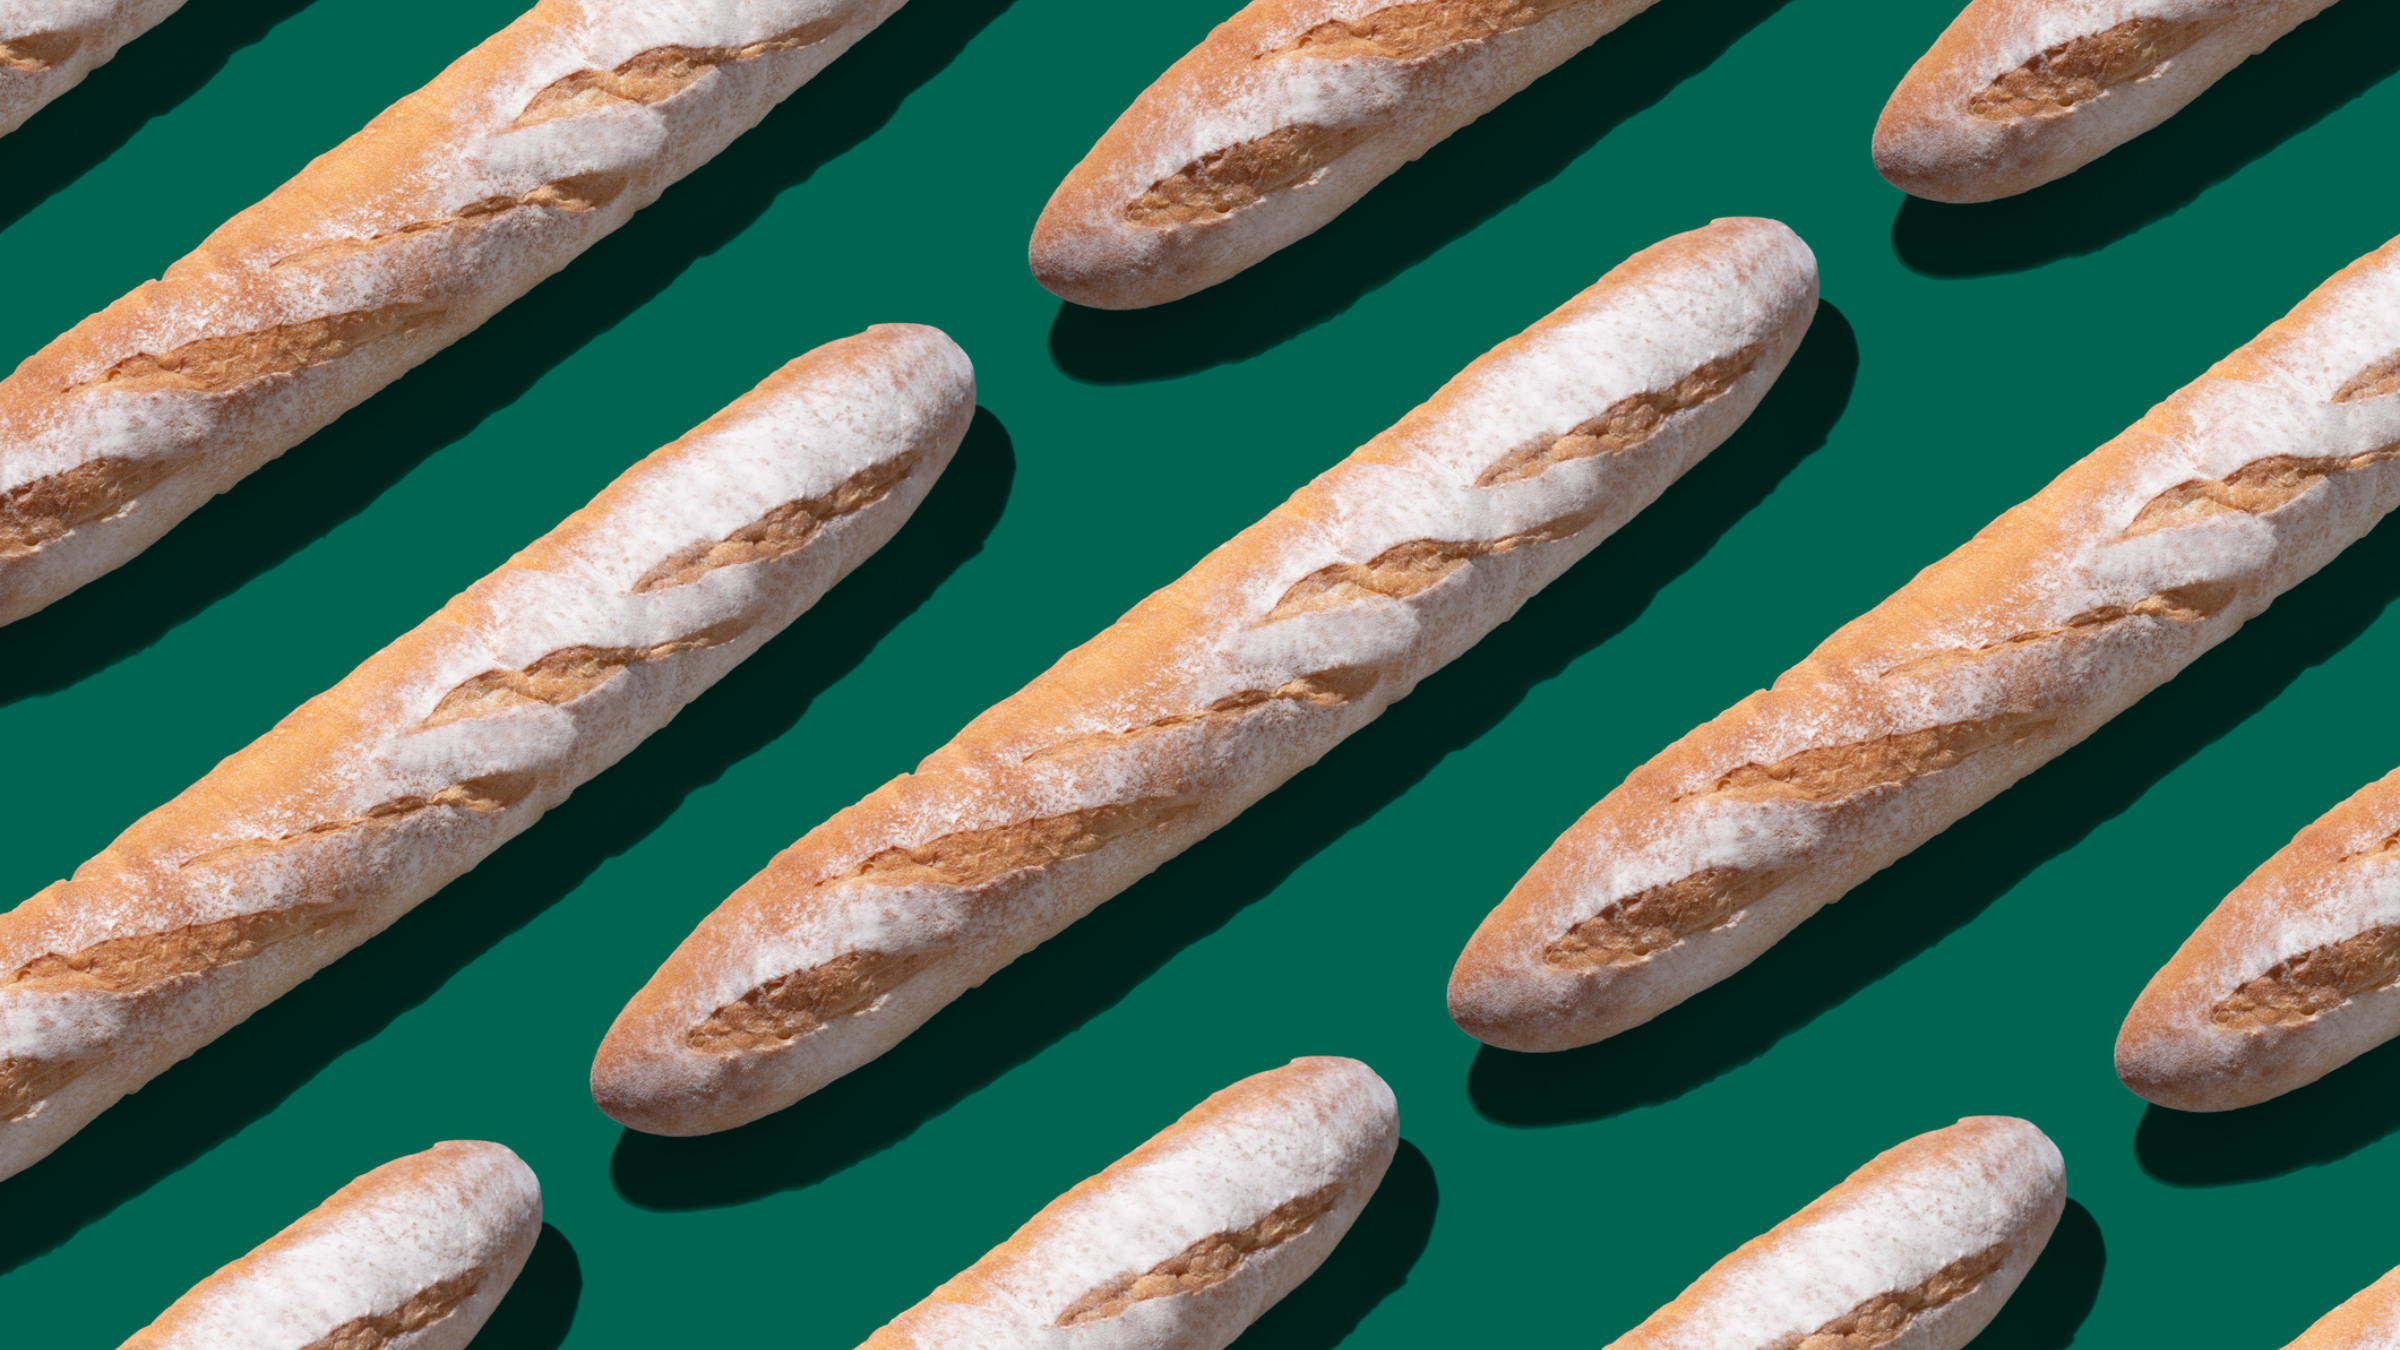 French Bread is Officially Recognized by UNESCO - Clean Eating